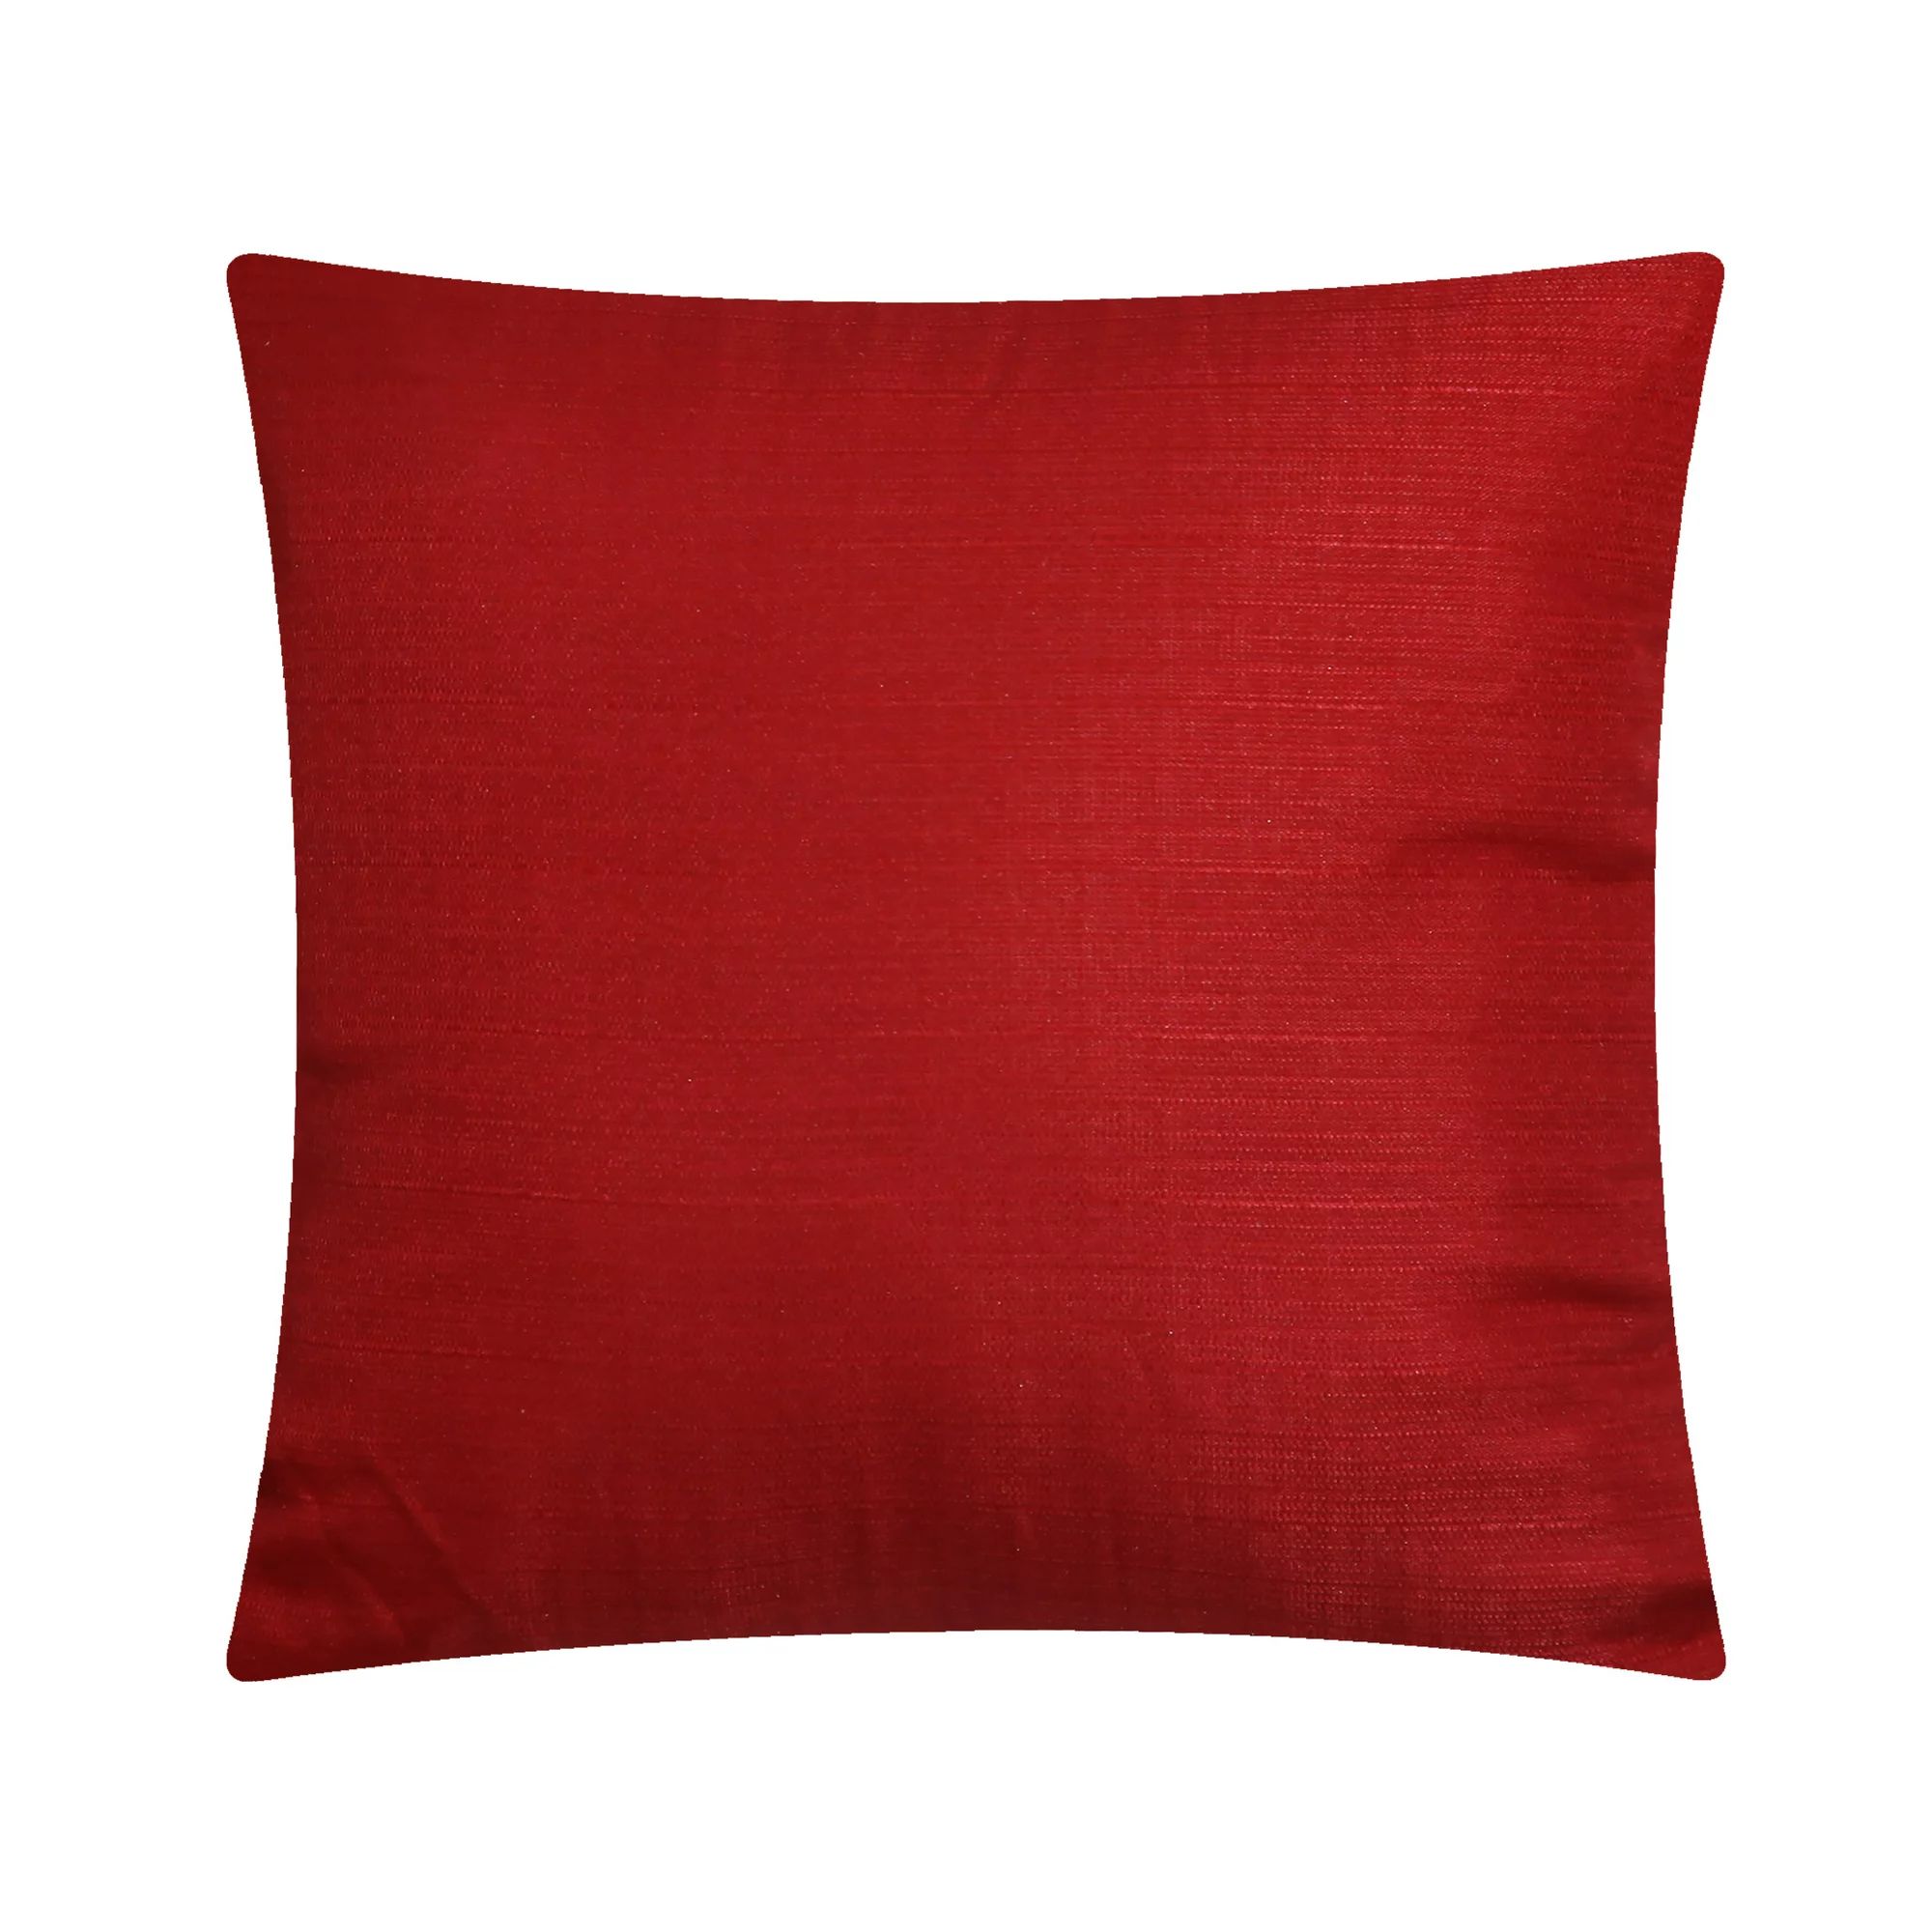 Mainstays Solid Decorative Throw Pillow, 16" x 16", Red | Walmart (US)